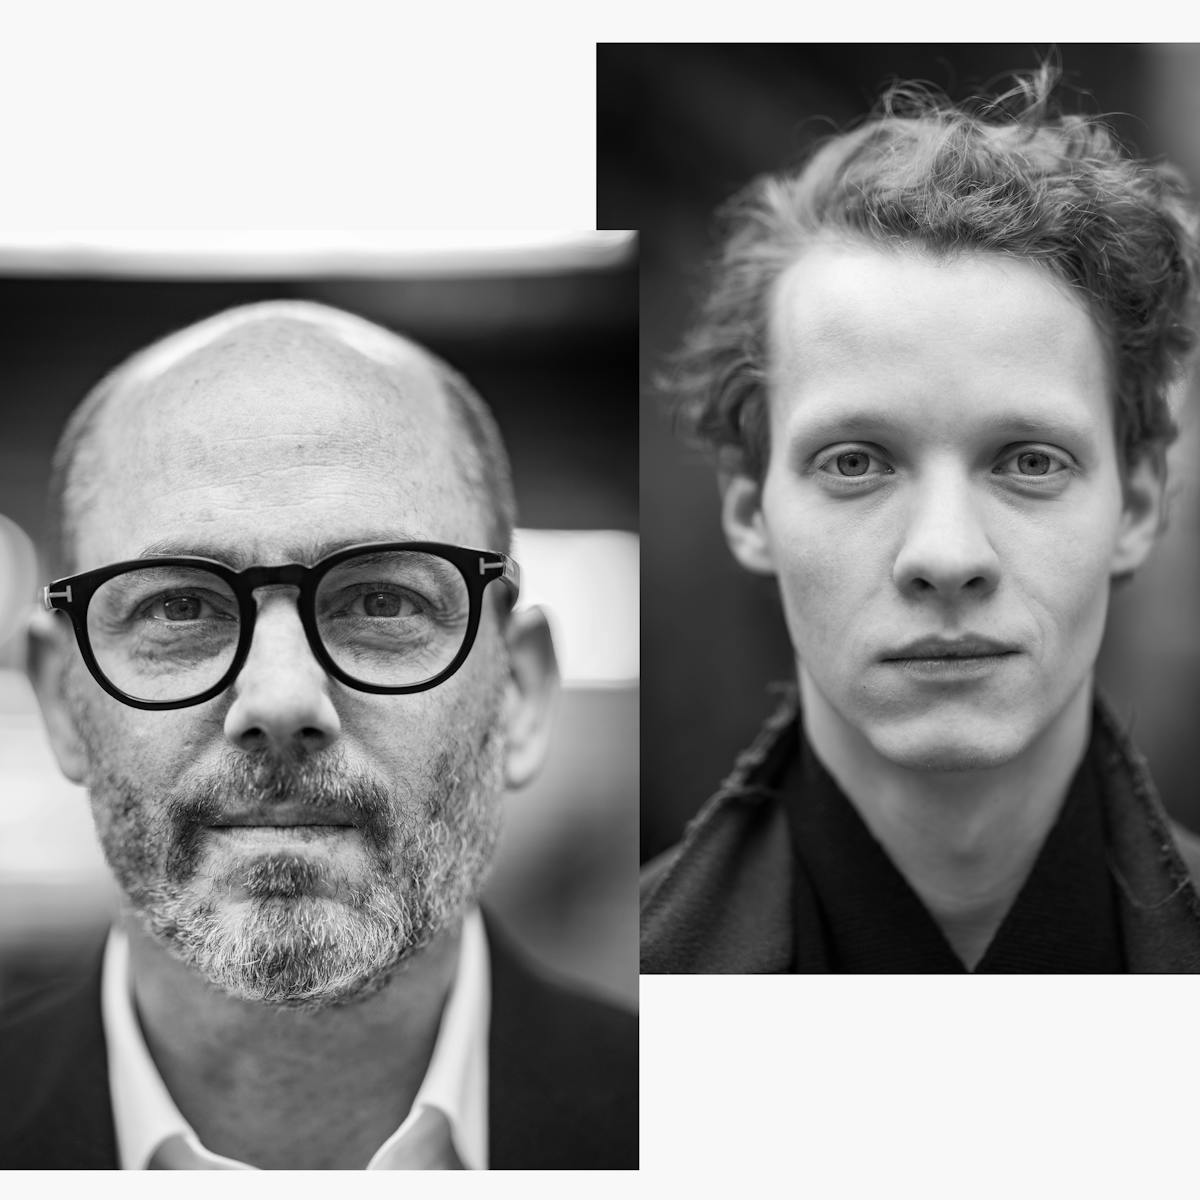 Albrecht Schuch, Edward Berger, and Felix Kammerer in three overlapping, black-and-white portraits. Schuch has a mustache and wears a black jacket. Berger wears dark rimmed glasses, a black jacket, and white shirt. Felix wears a black jacket with a high neck.